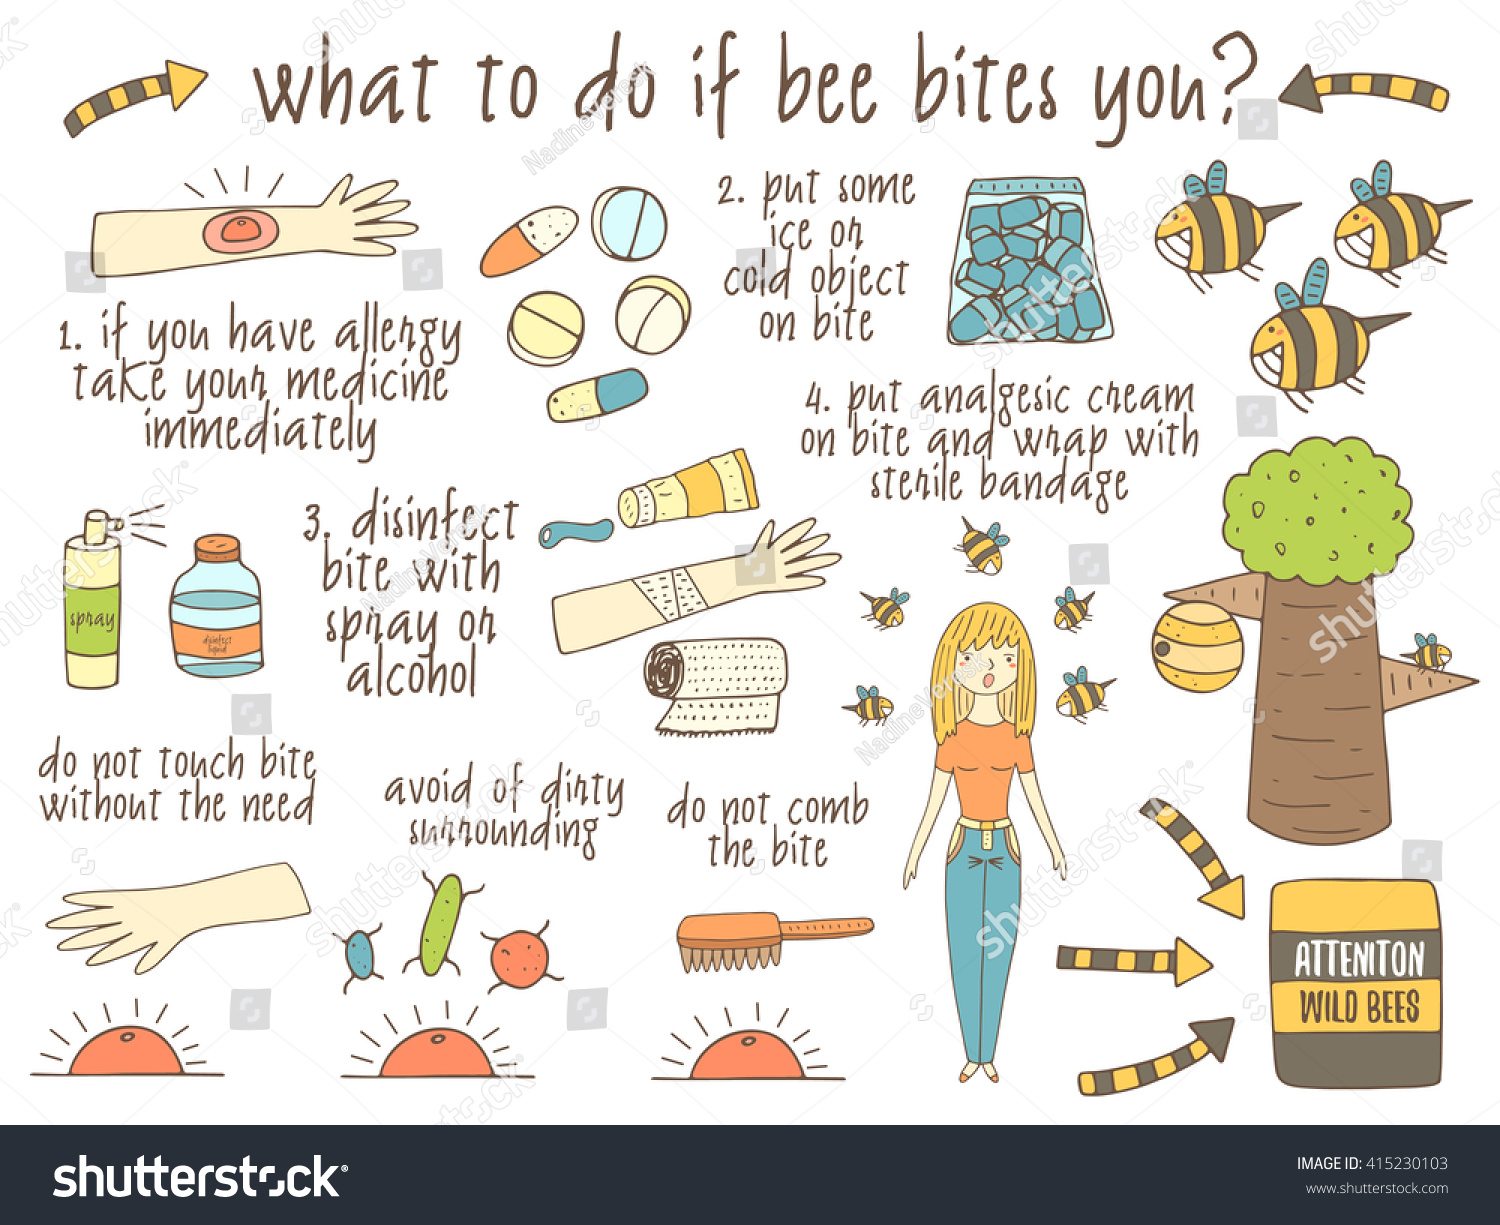 Infographic About What Do Bee Bites Stock Vector Royalty Free 415230103 3197